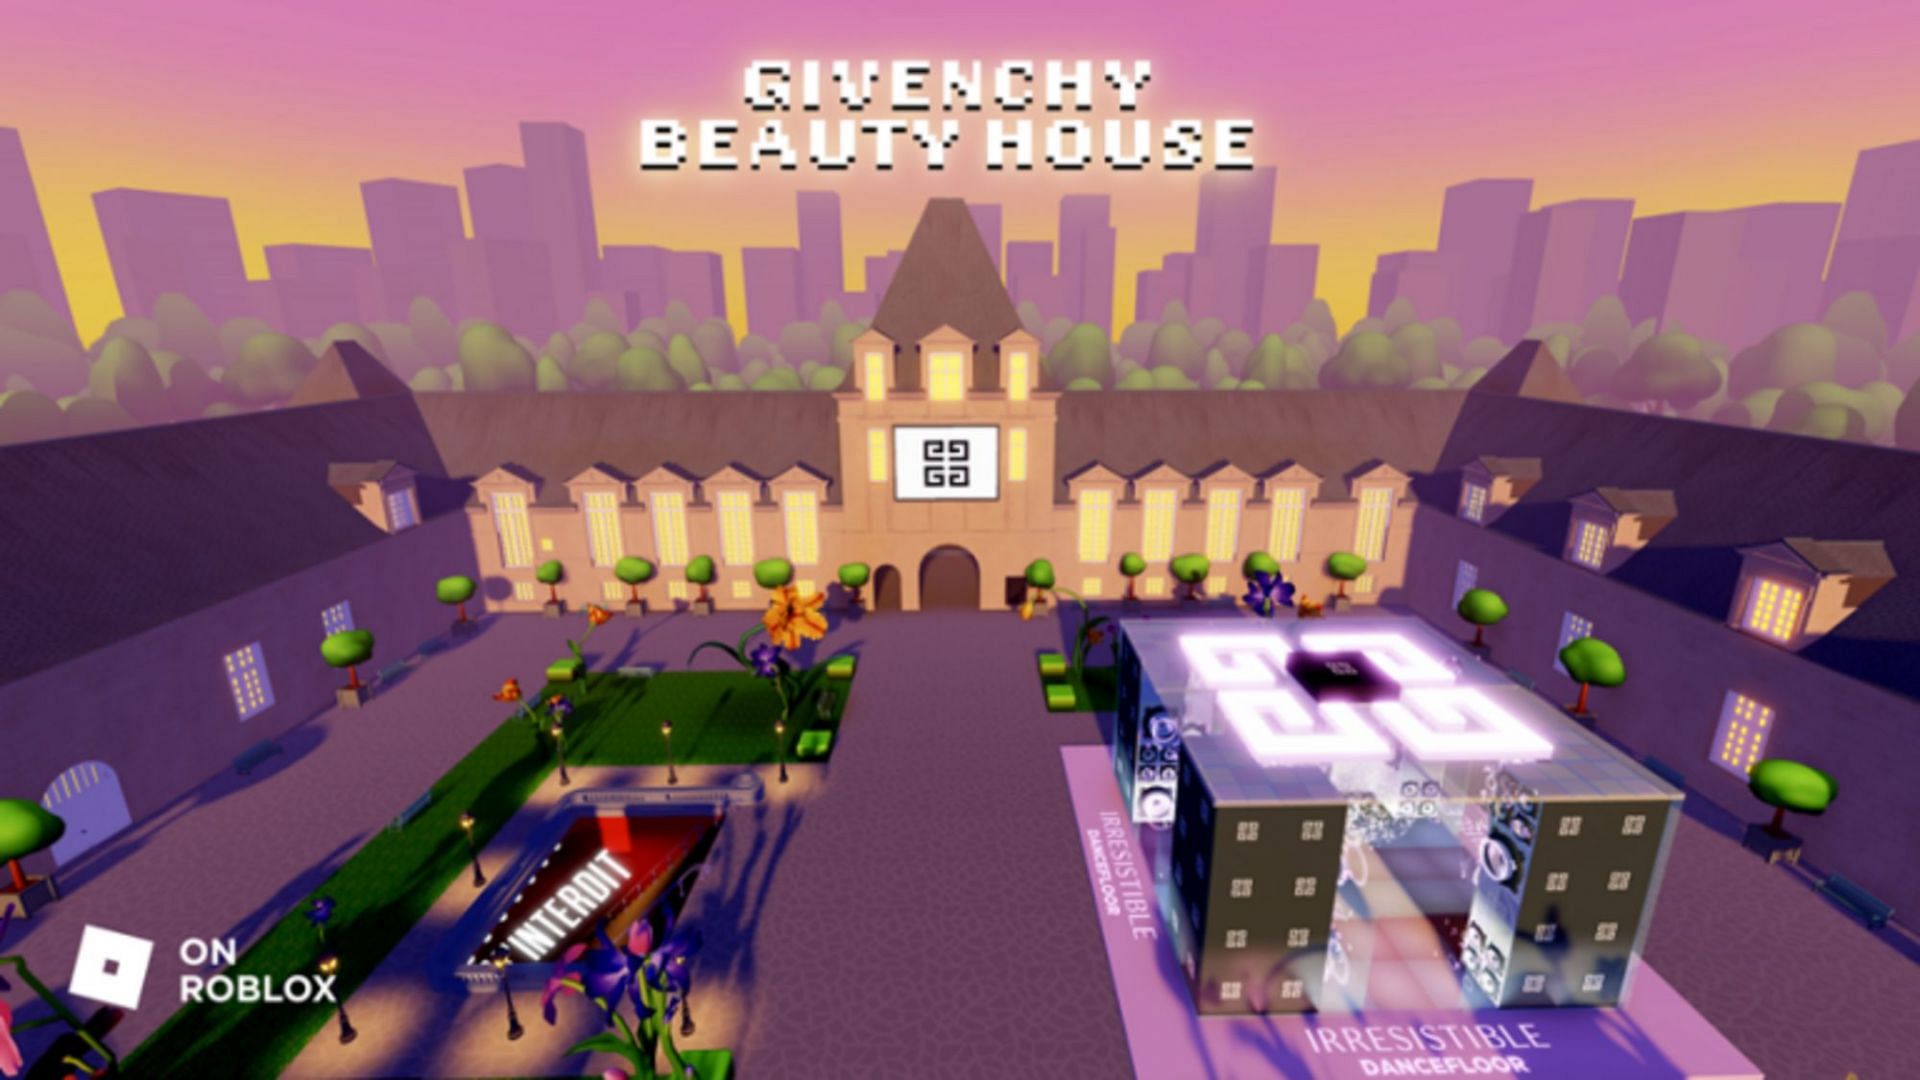 Try on brand new products in Givenchy Beauty House (Image via Roblox)